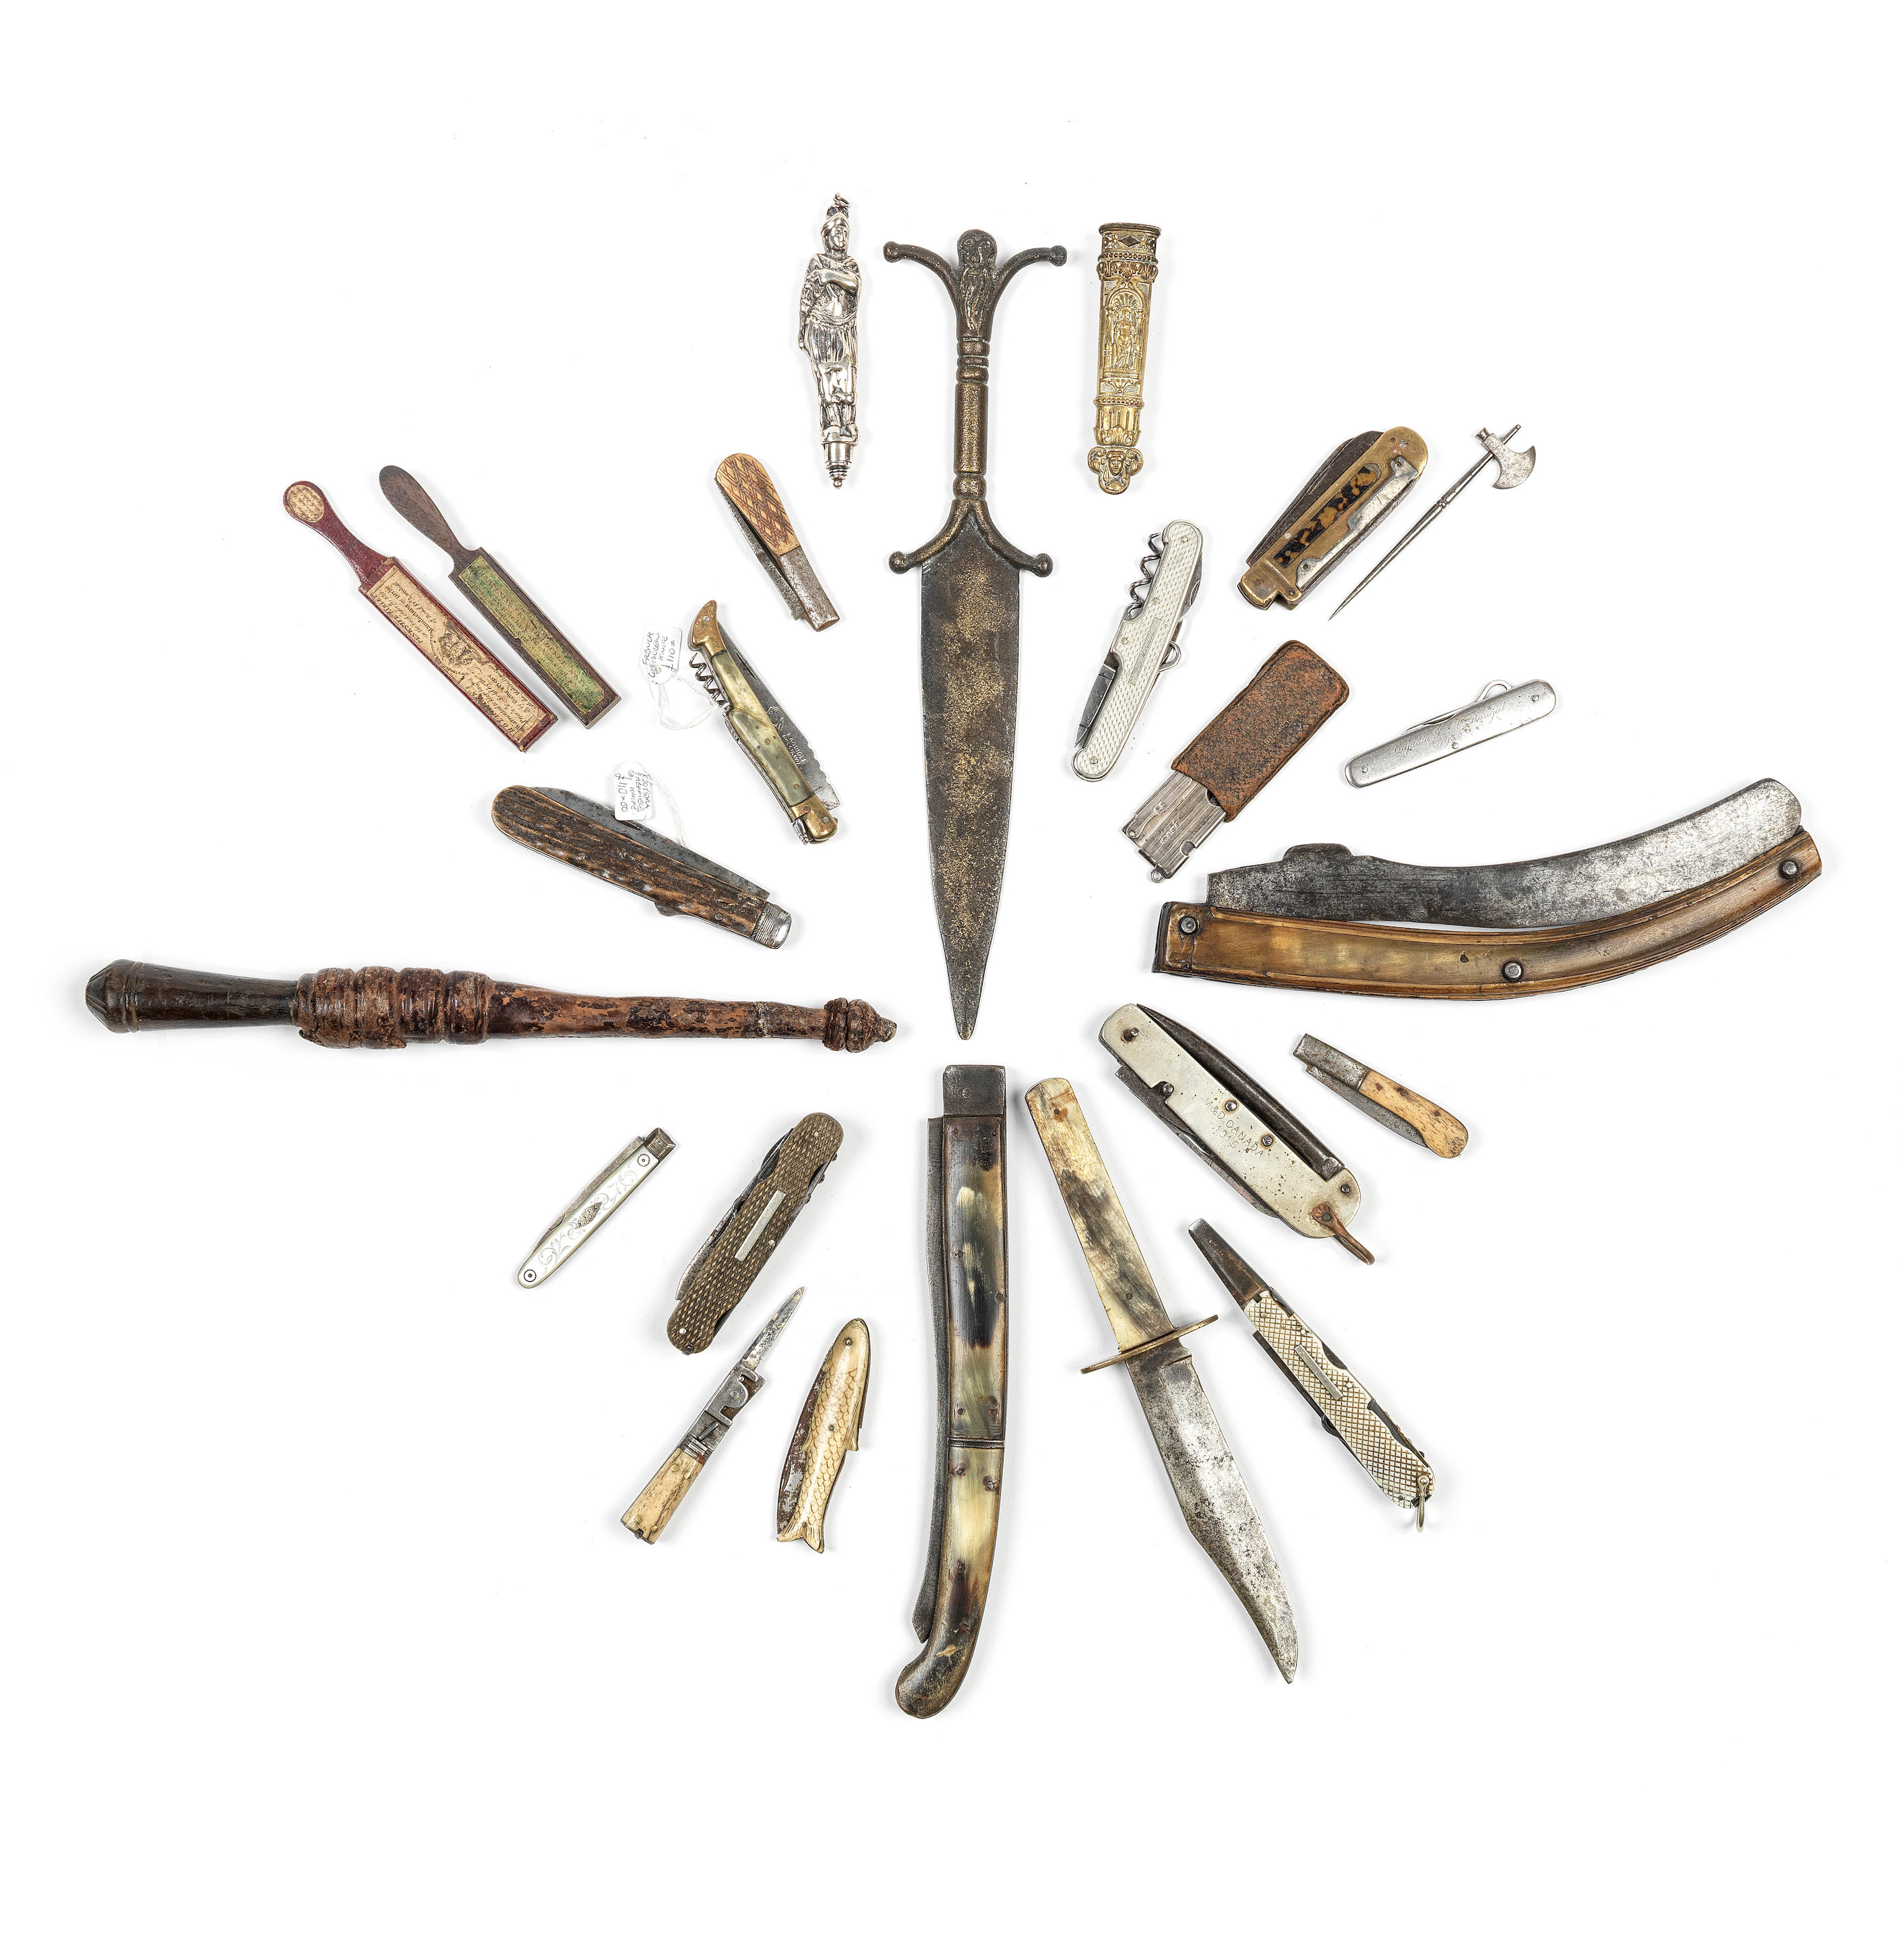 A group of daggers, pocket knives, and related items